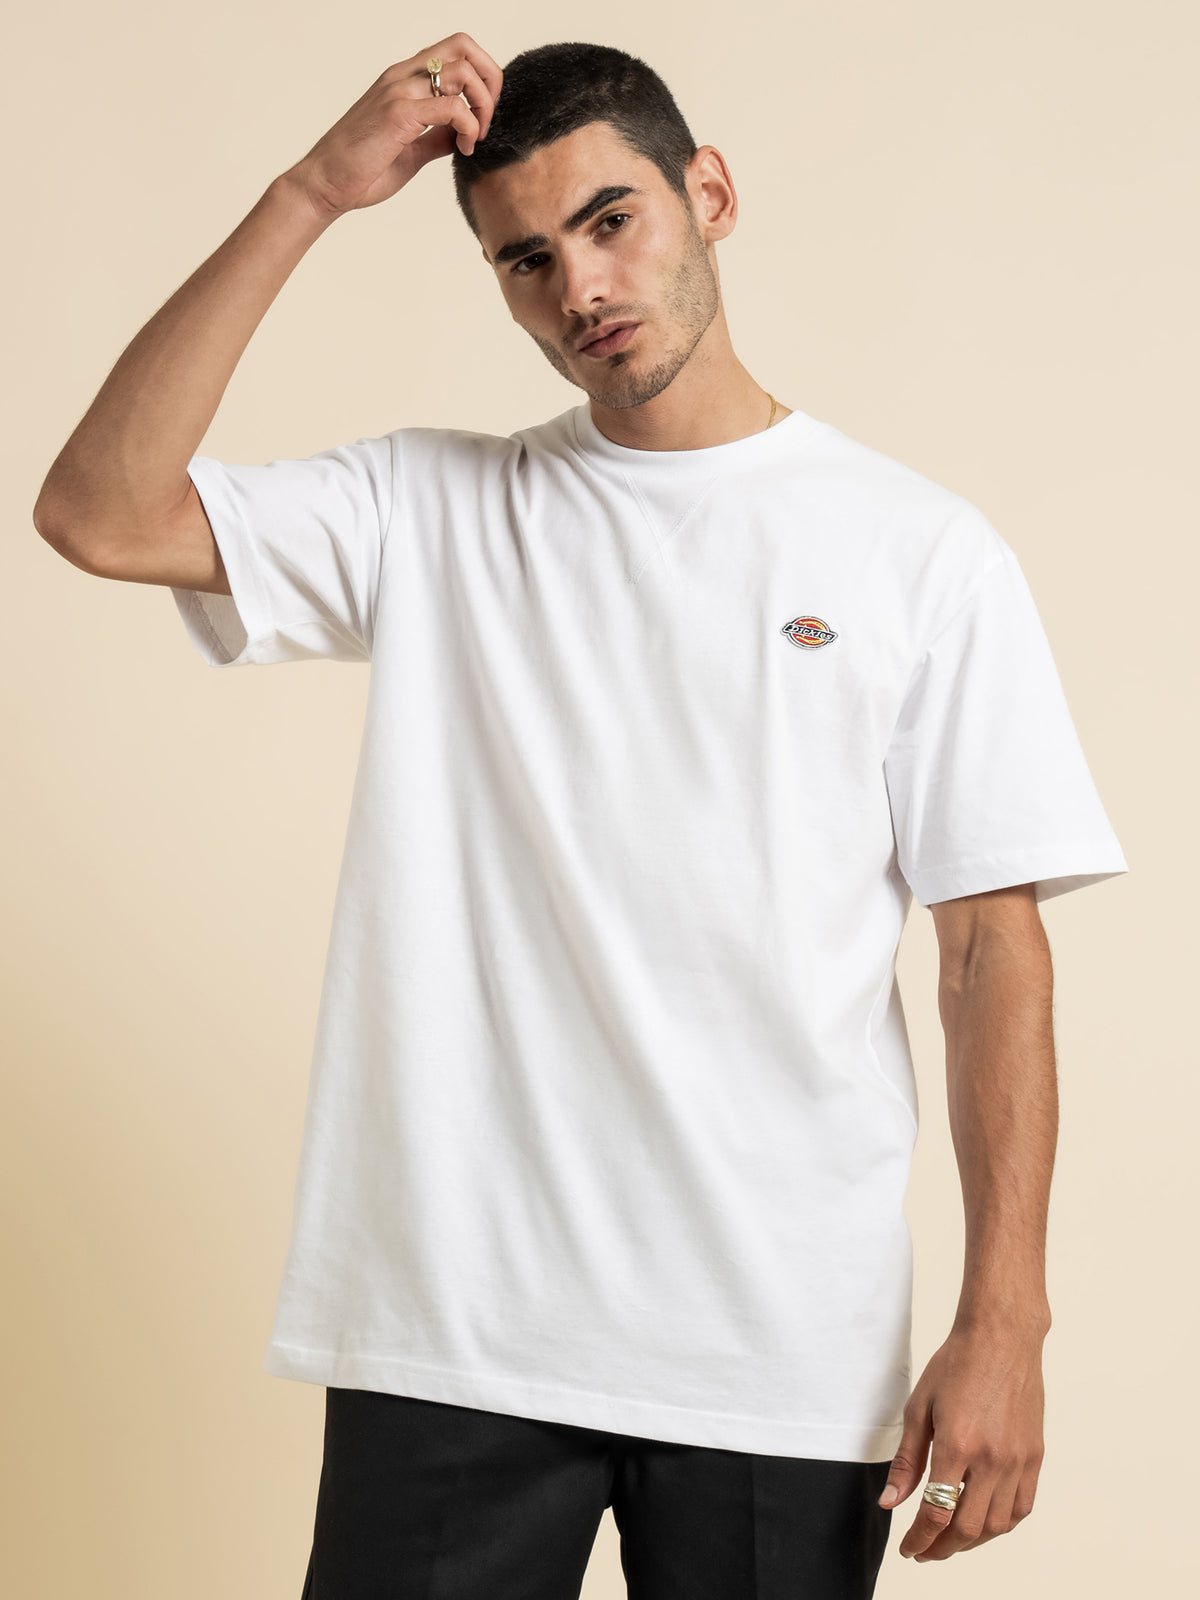 H.S Rockwood Classic Fit T-Shirt in White